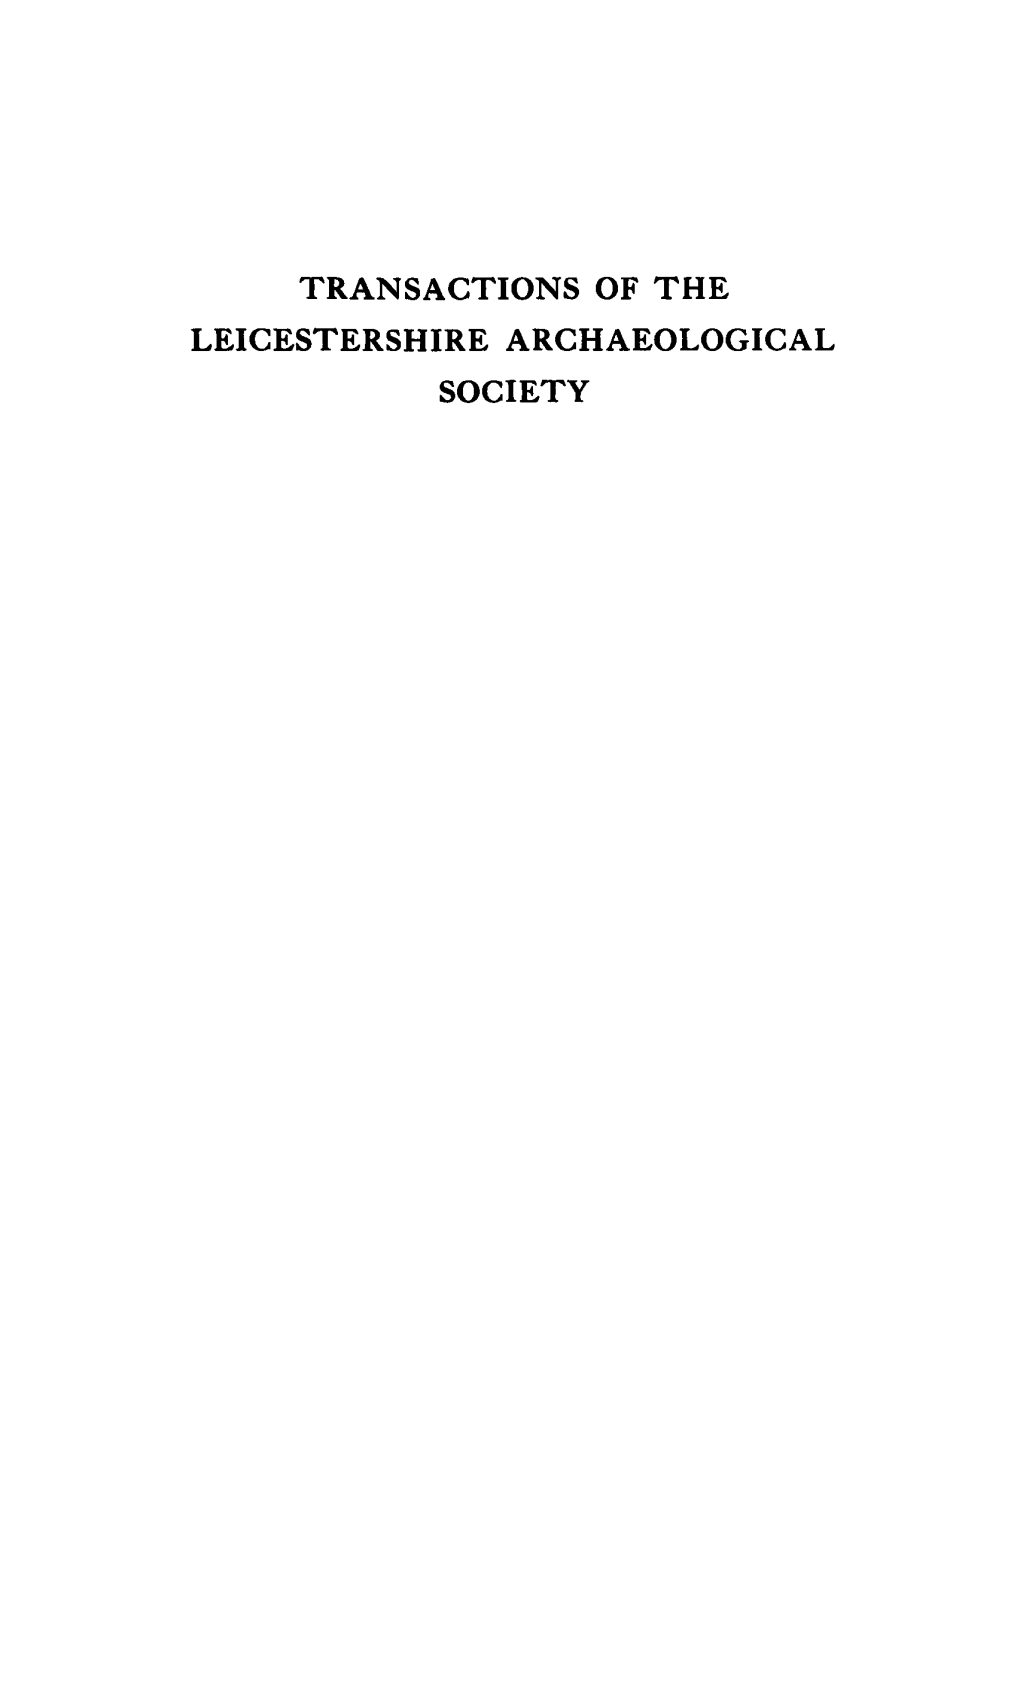 Transactions of the Leicestershire Archaeological Society